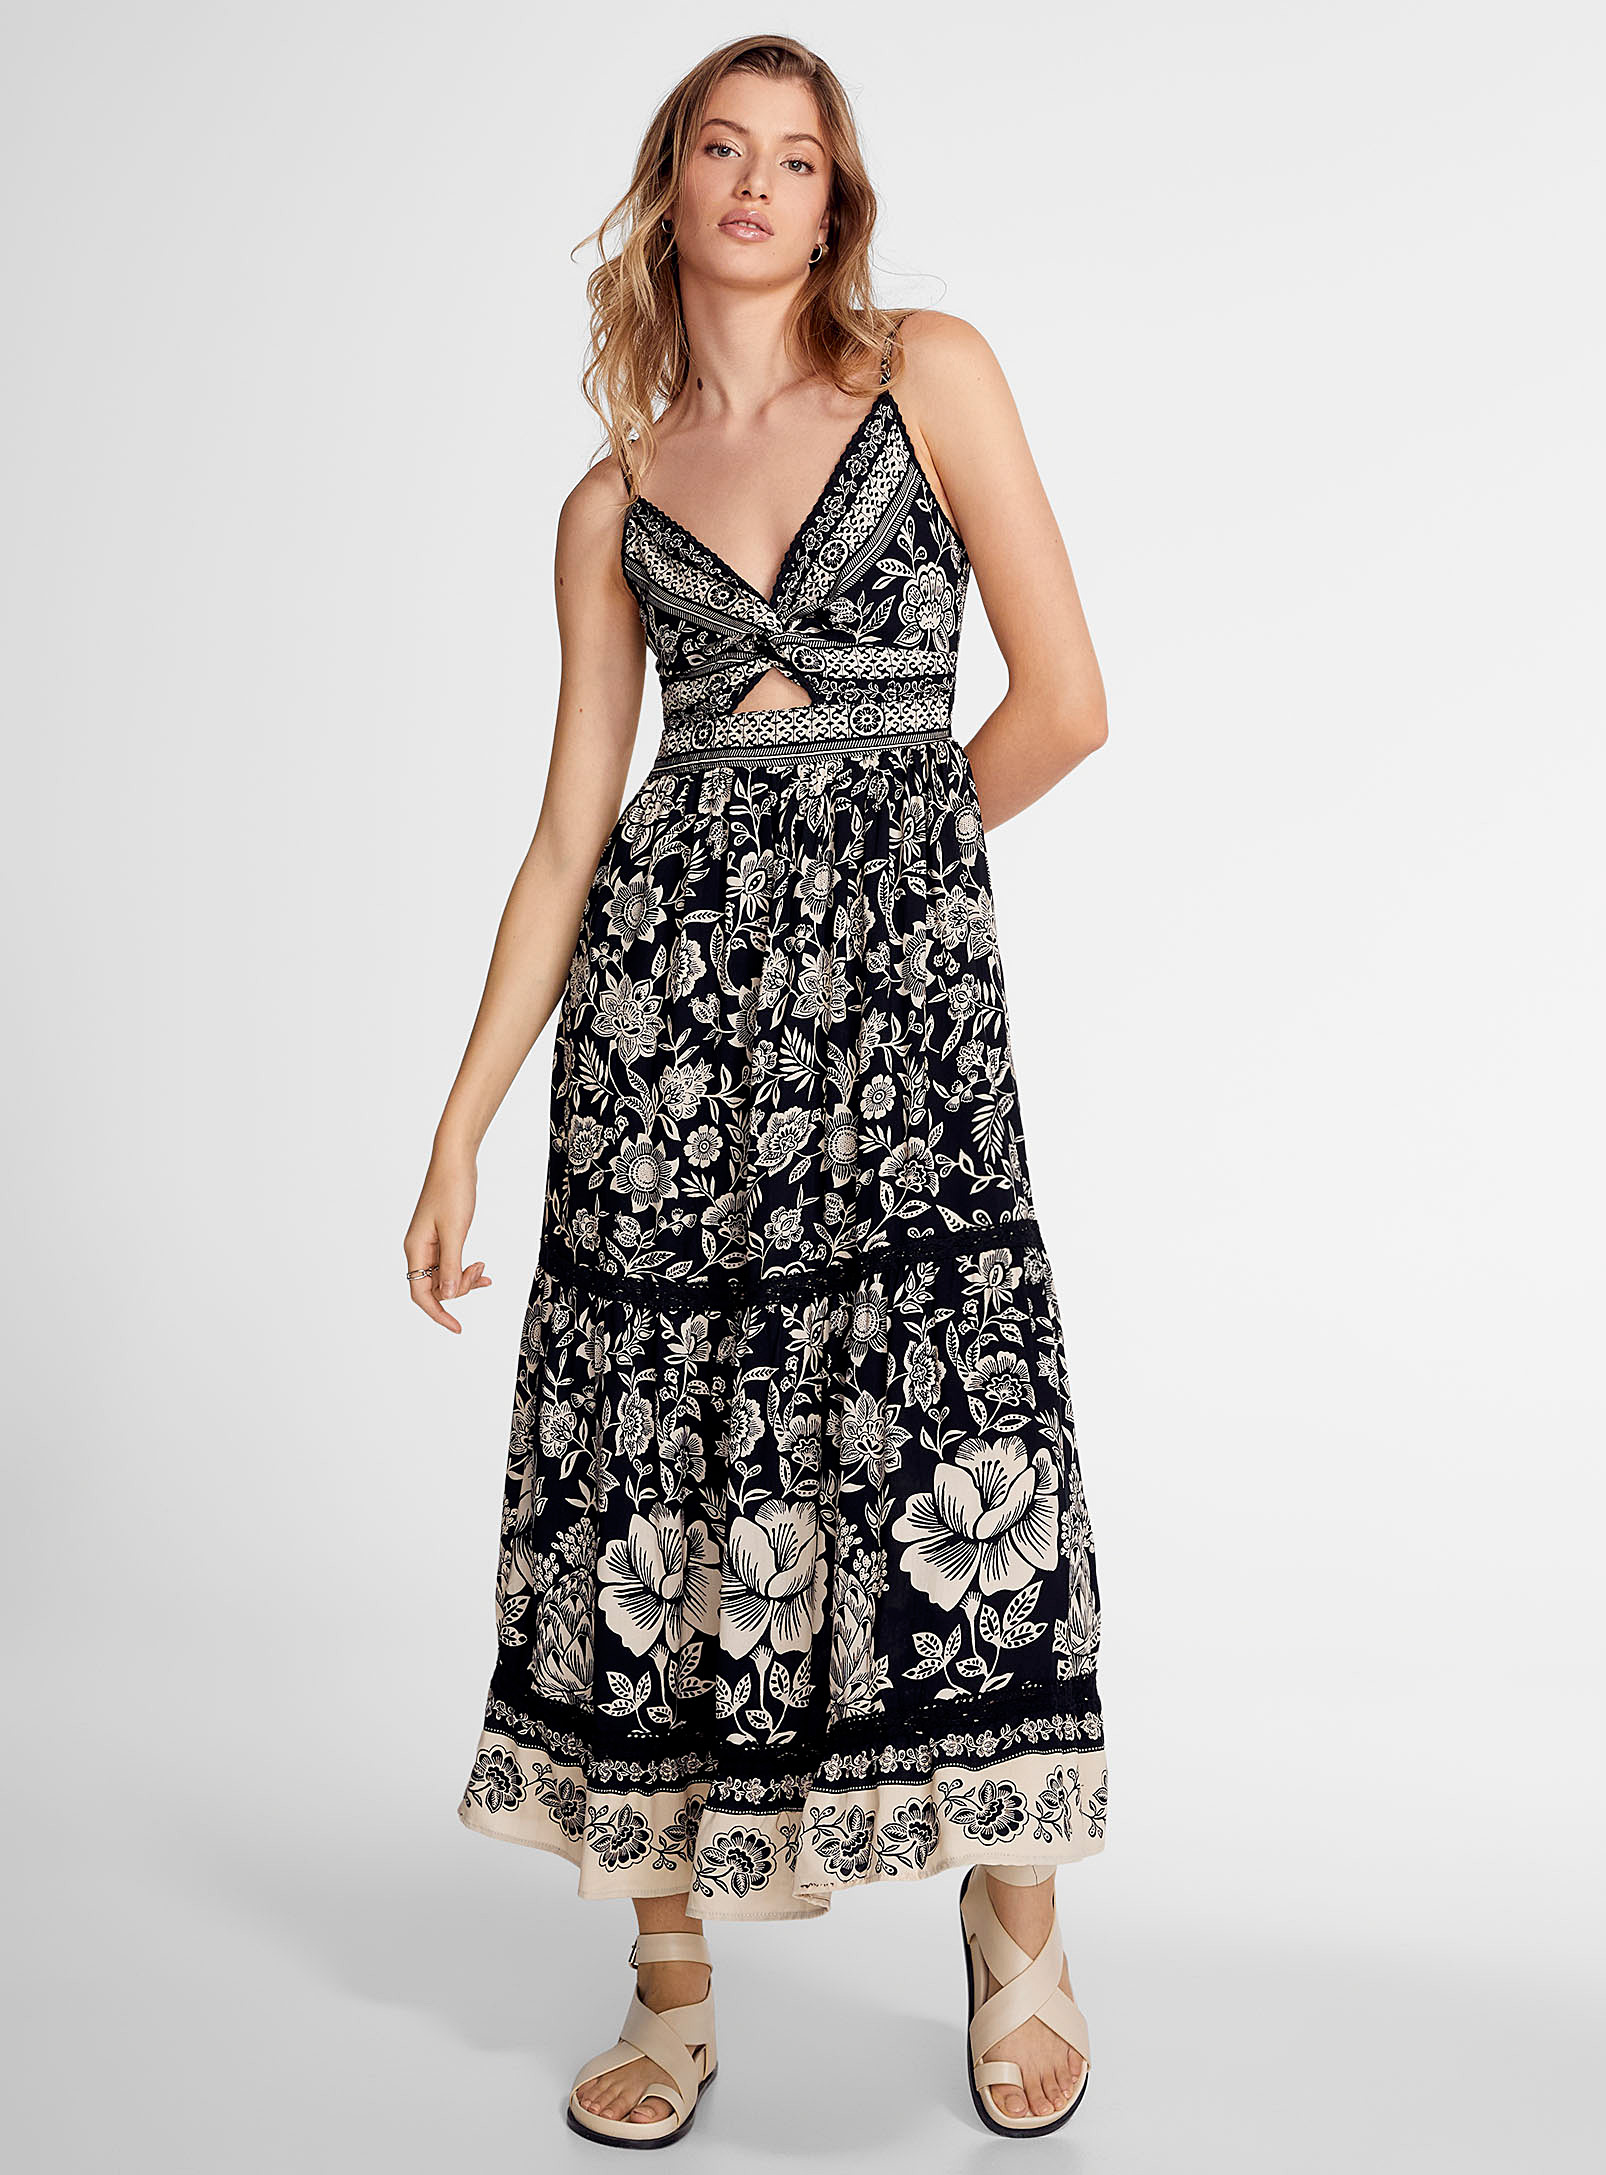 Icone Floral Fantasy Maxi Dress In Black And White